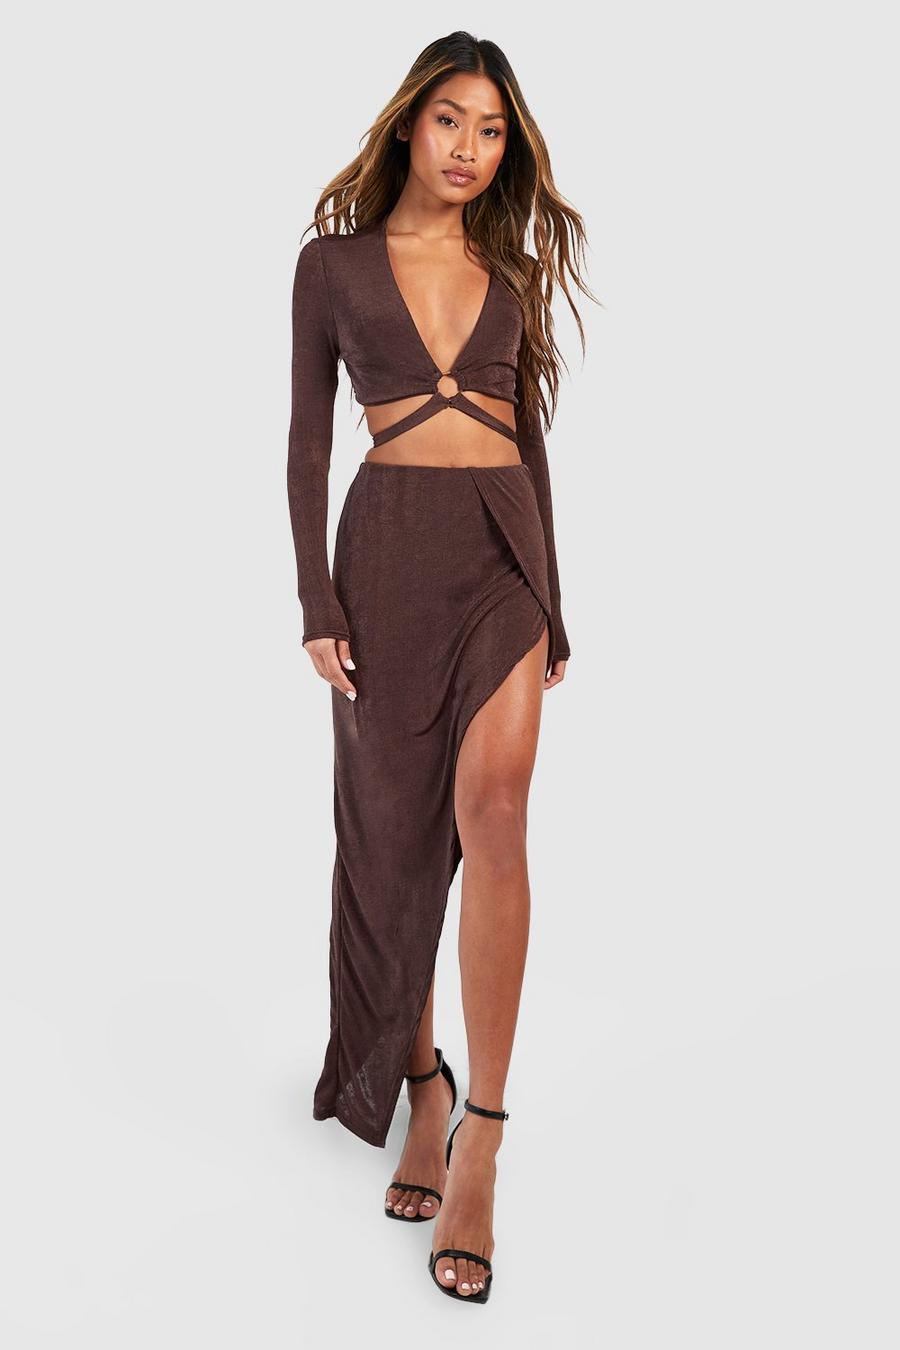 Chocolate brown Acetate Slinky O Ring Cut Out Top & Maxi Skirt